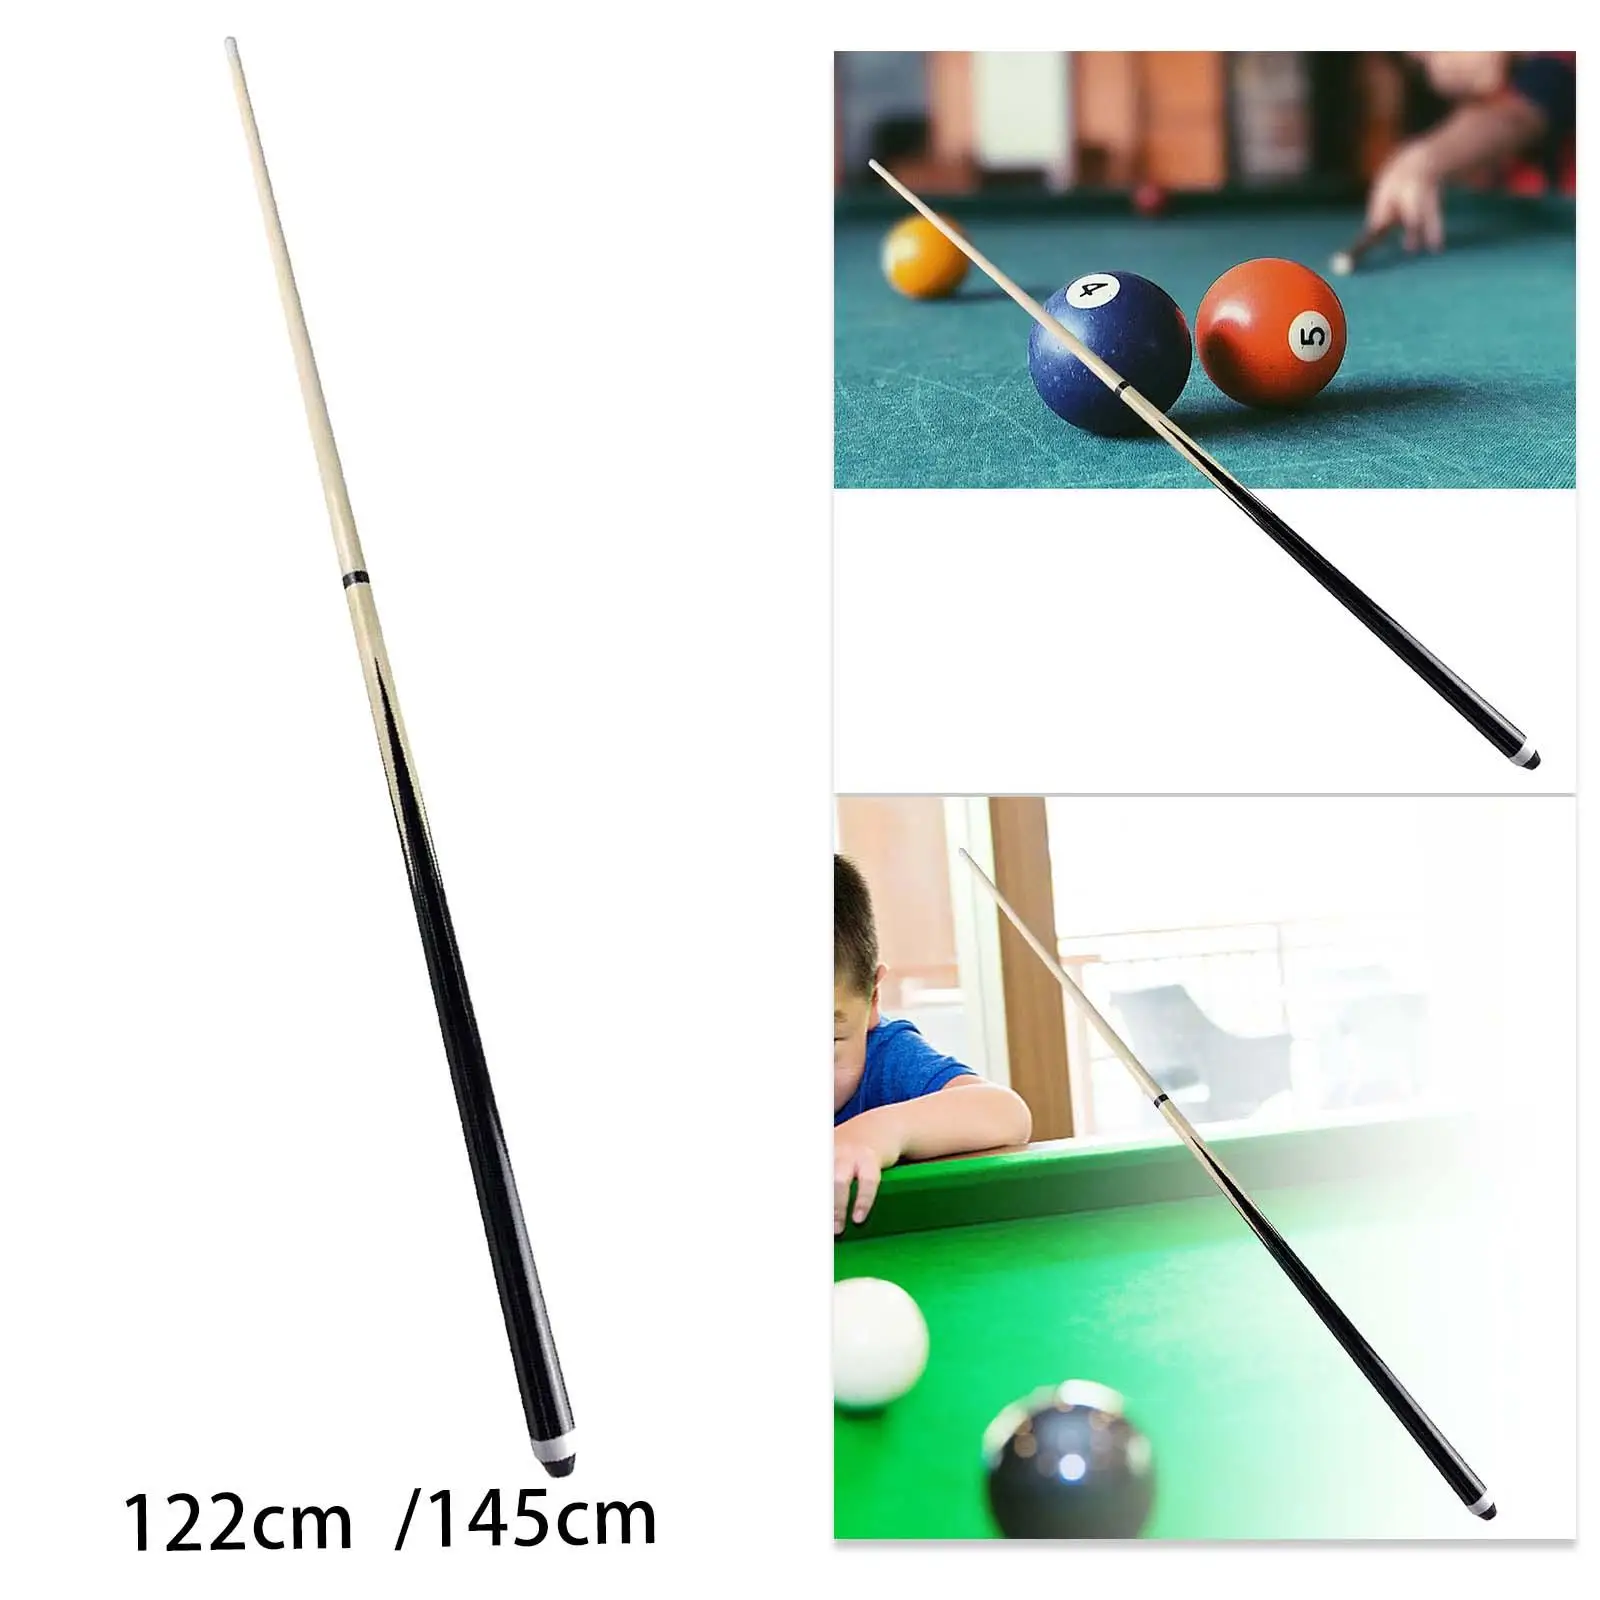 Kids Pool Cue Portable House Wood Billiard Pool Cue for House Billiards Children